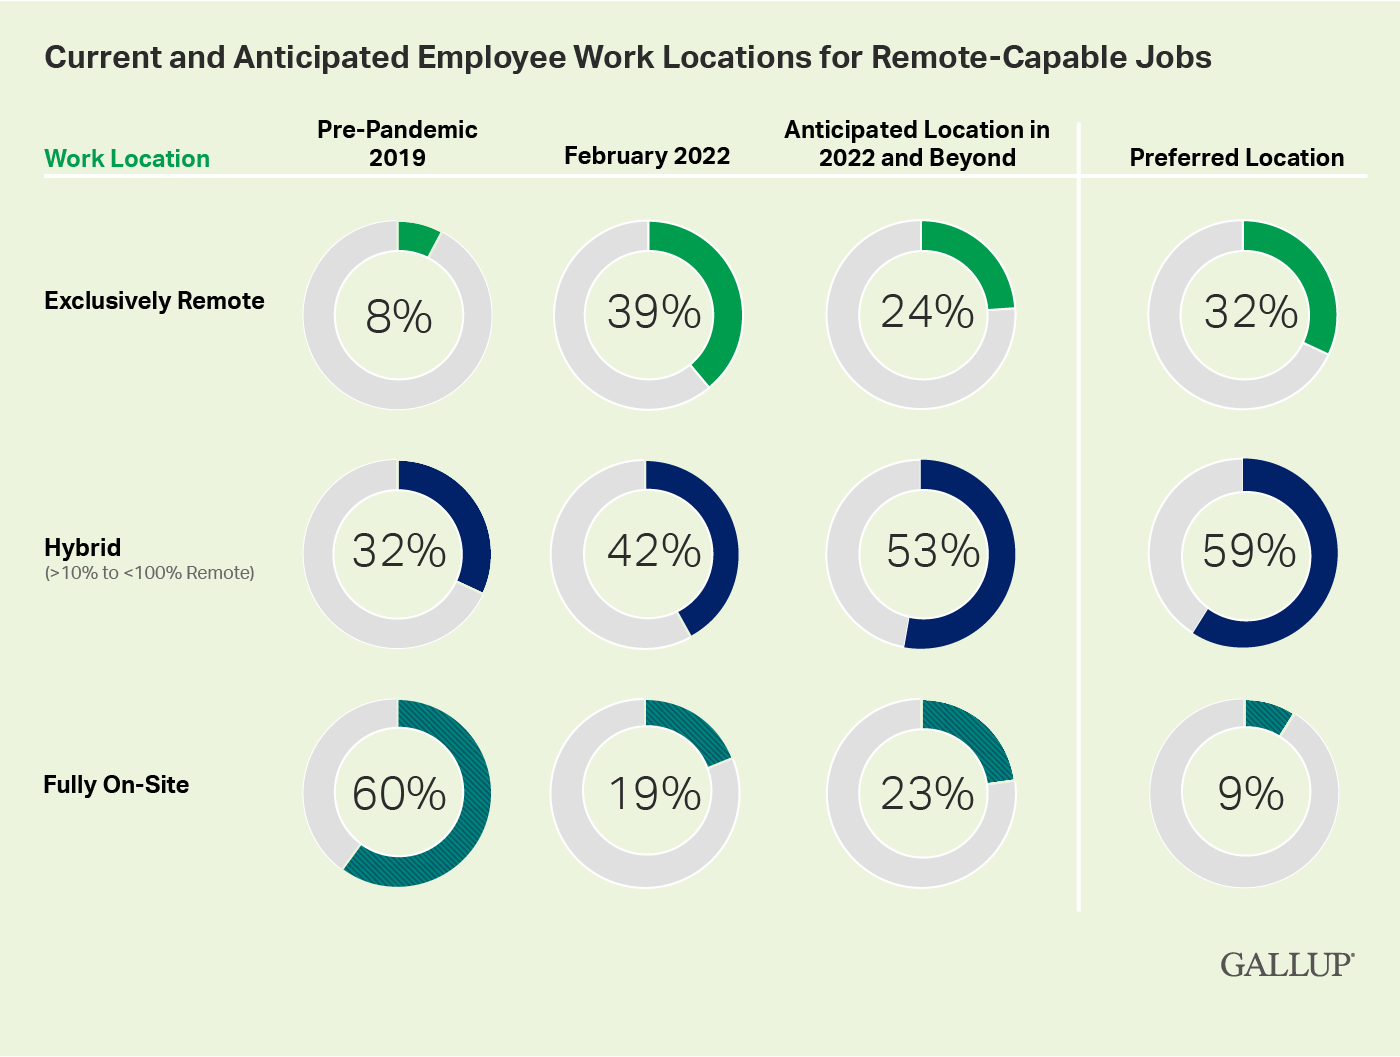 Current and anticipated employee work locations for remote-capable jobs